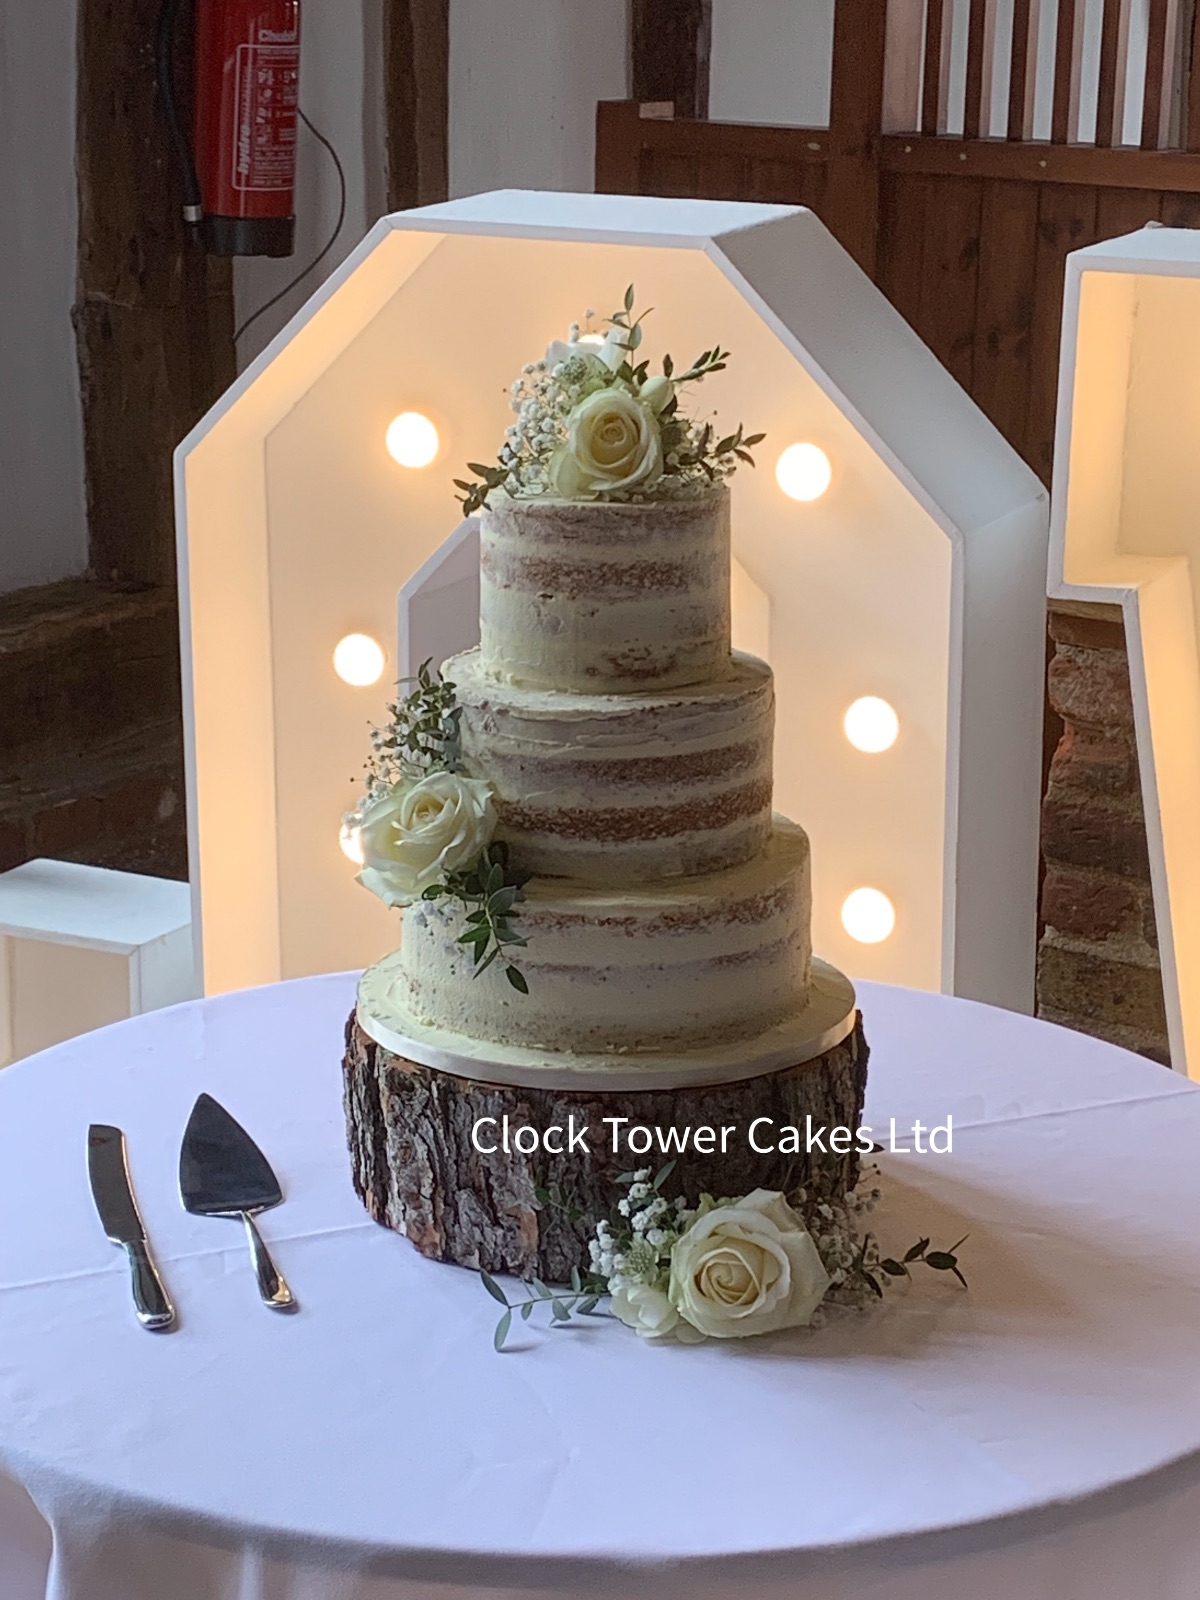 Clock Tower Cakes-Image-3